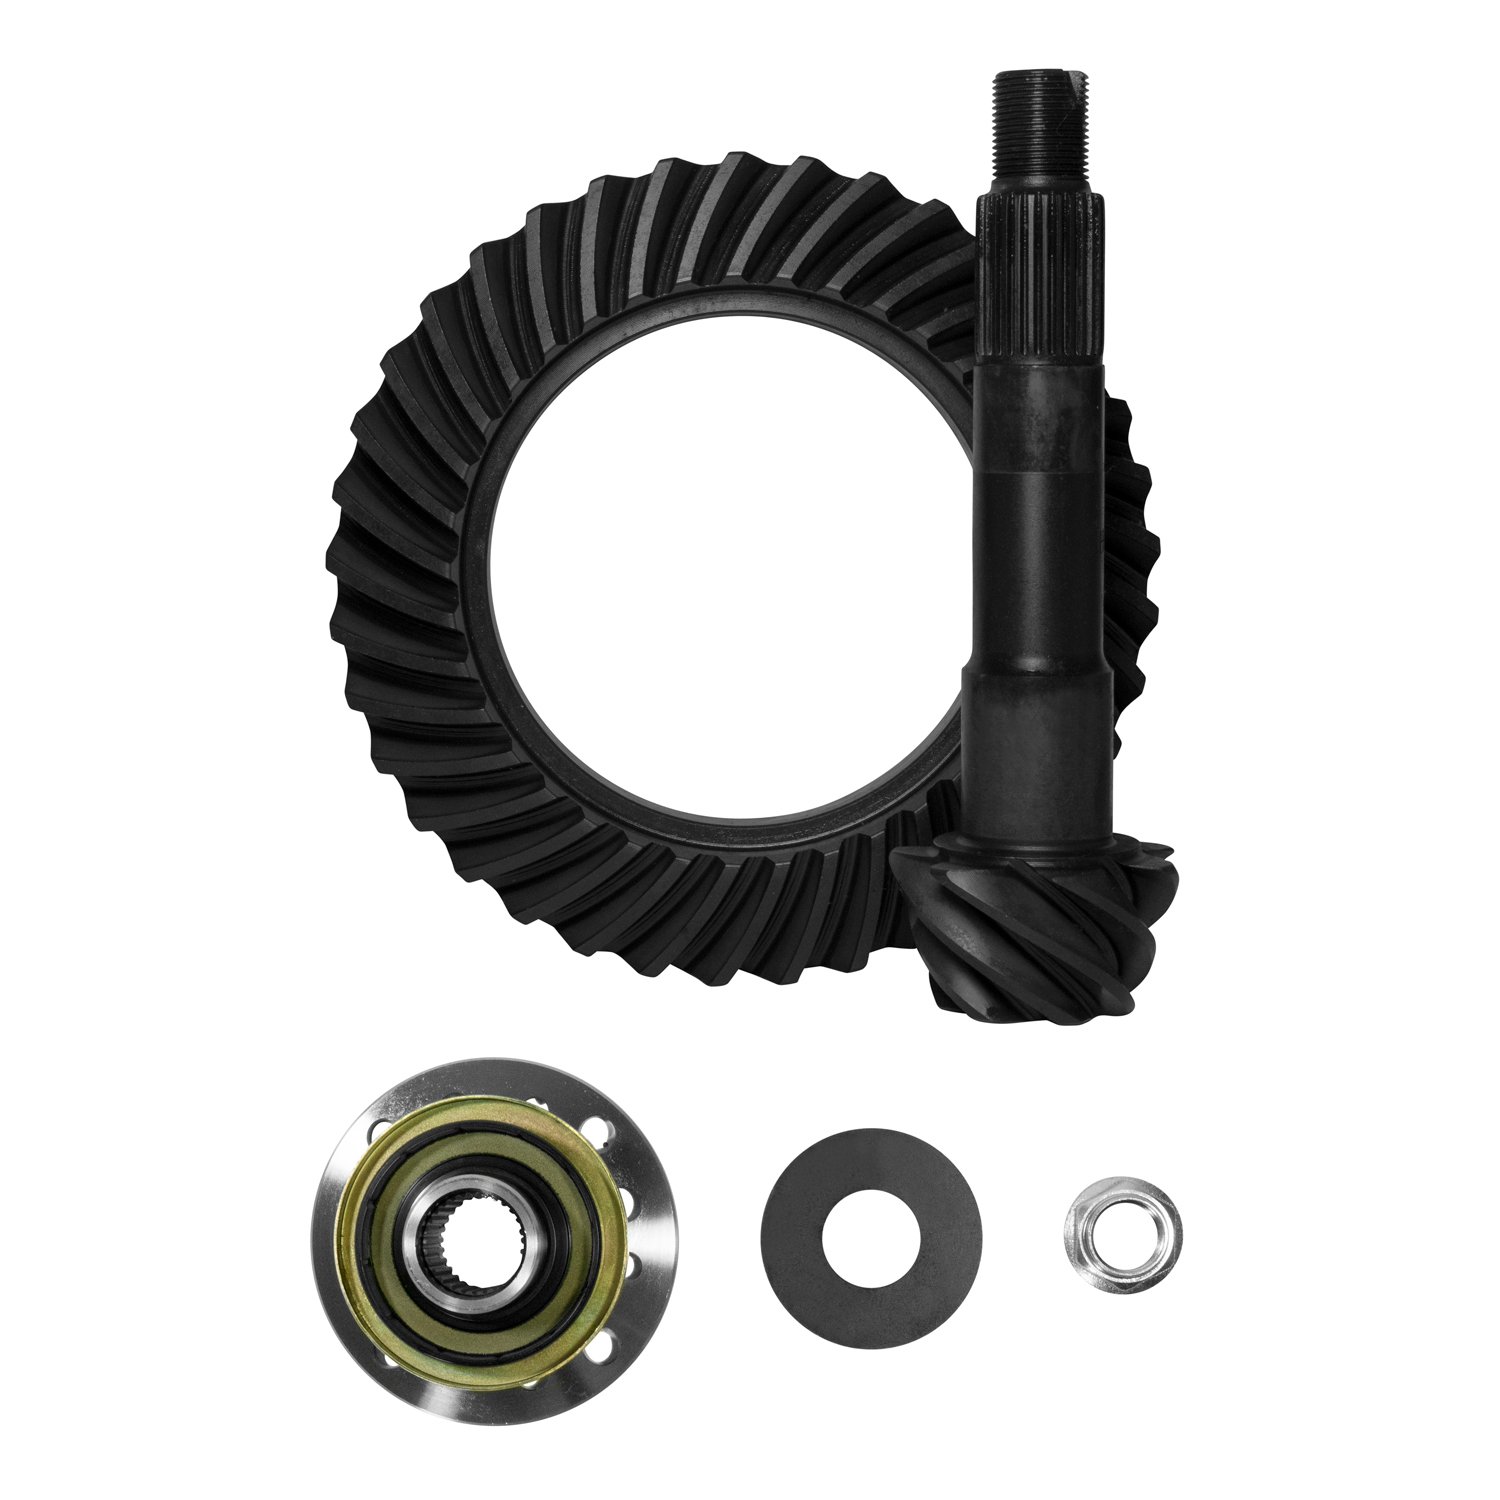 High Performance Ring & Pinion Gear Set For Toyota V6 In A 4.56 Ratio